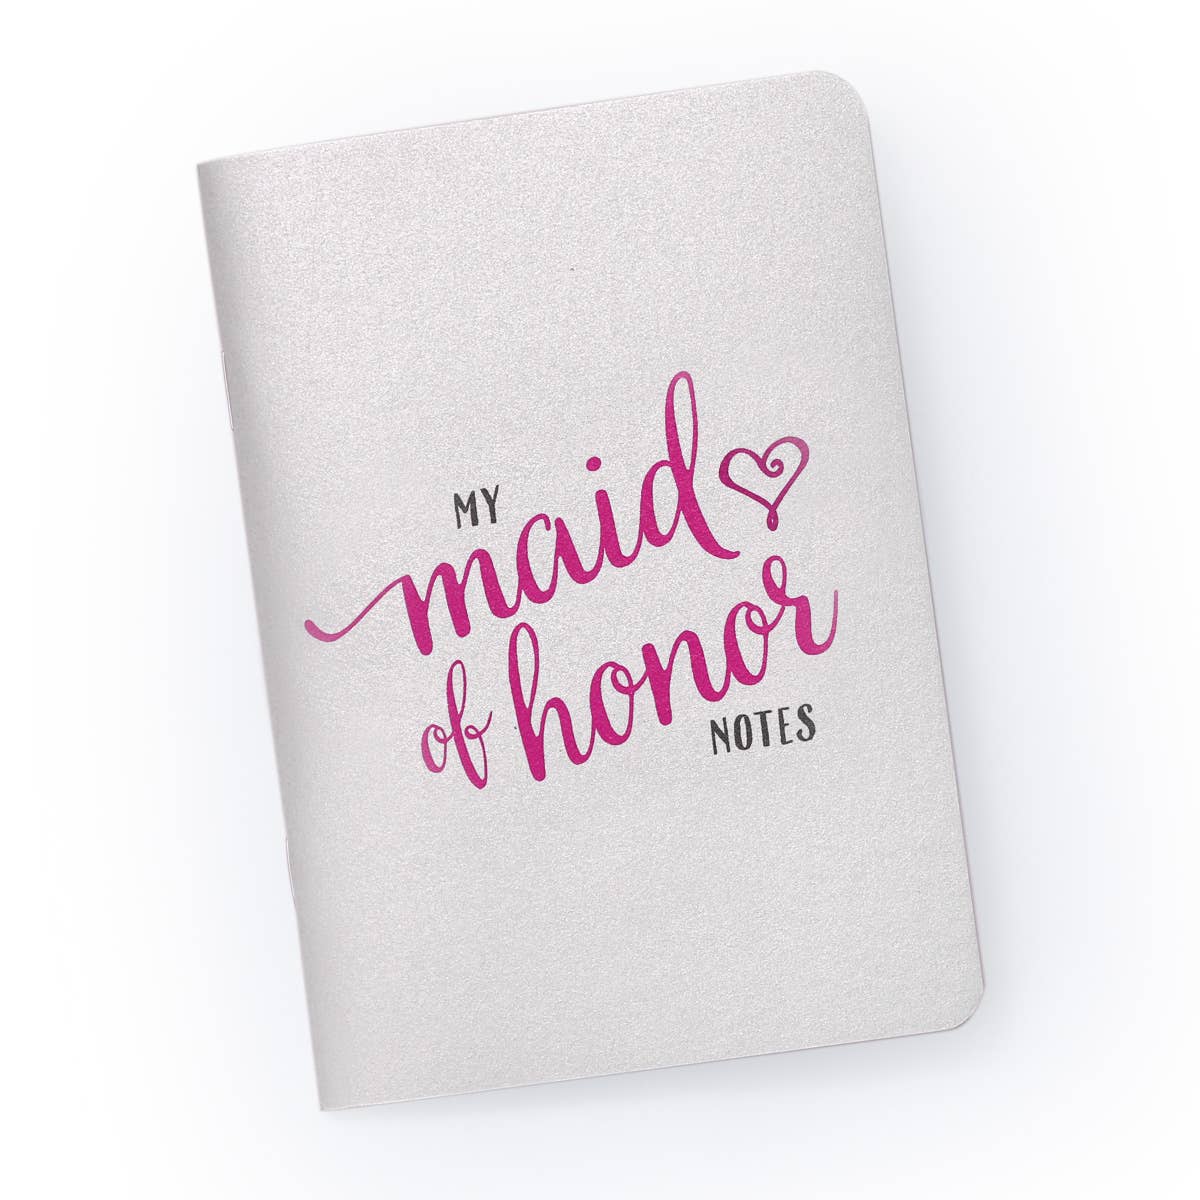 My Maid of Honor Notes - Bridal Party Planning Notebook